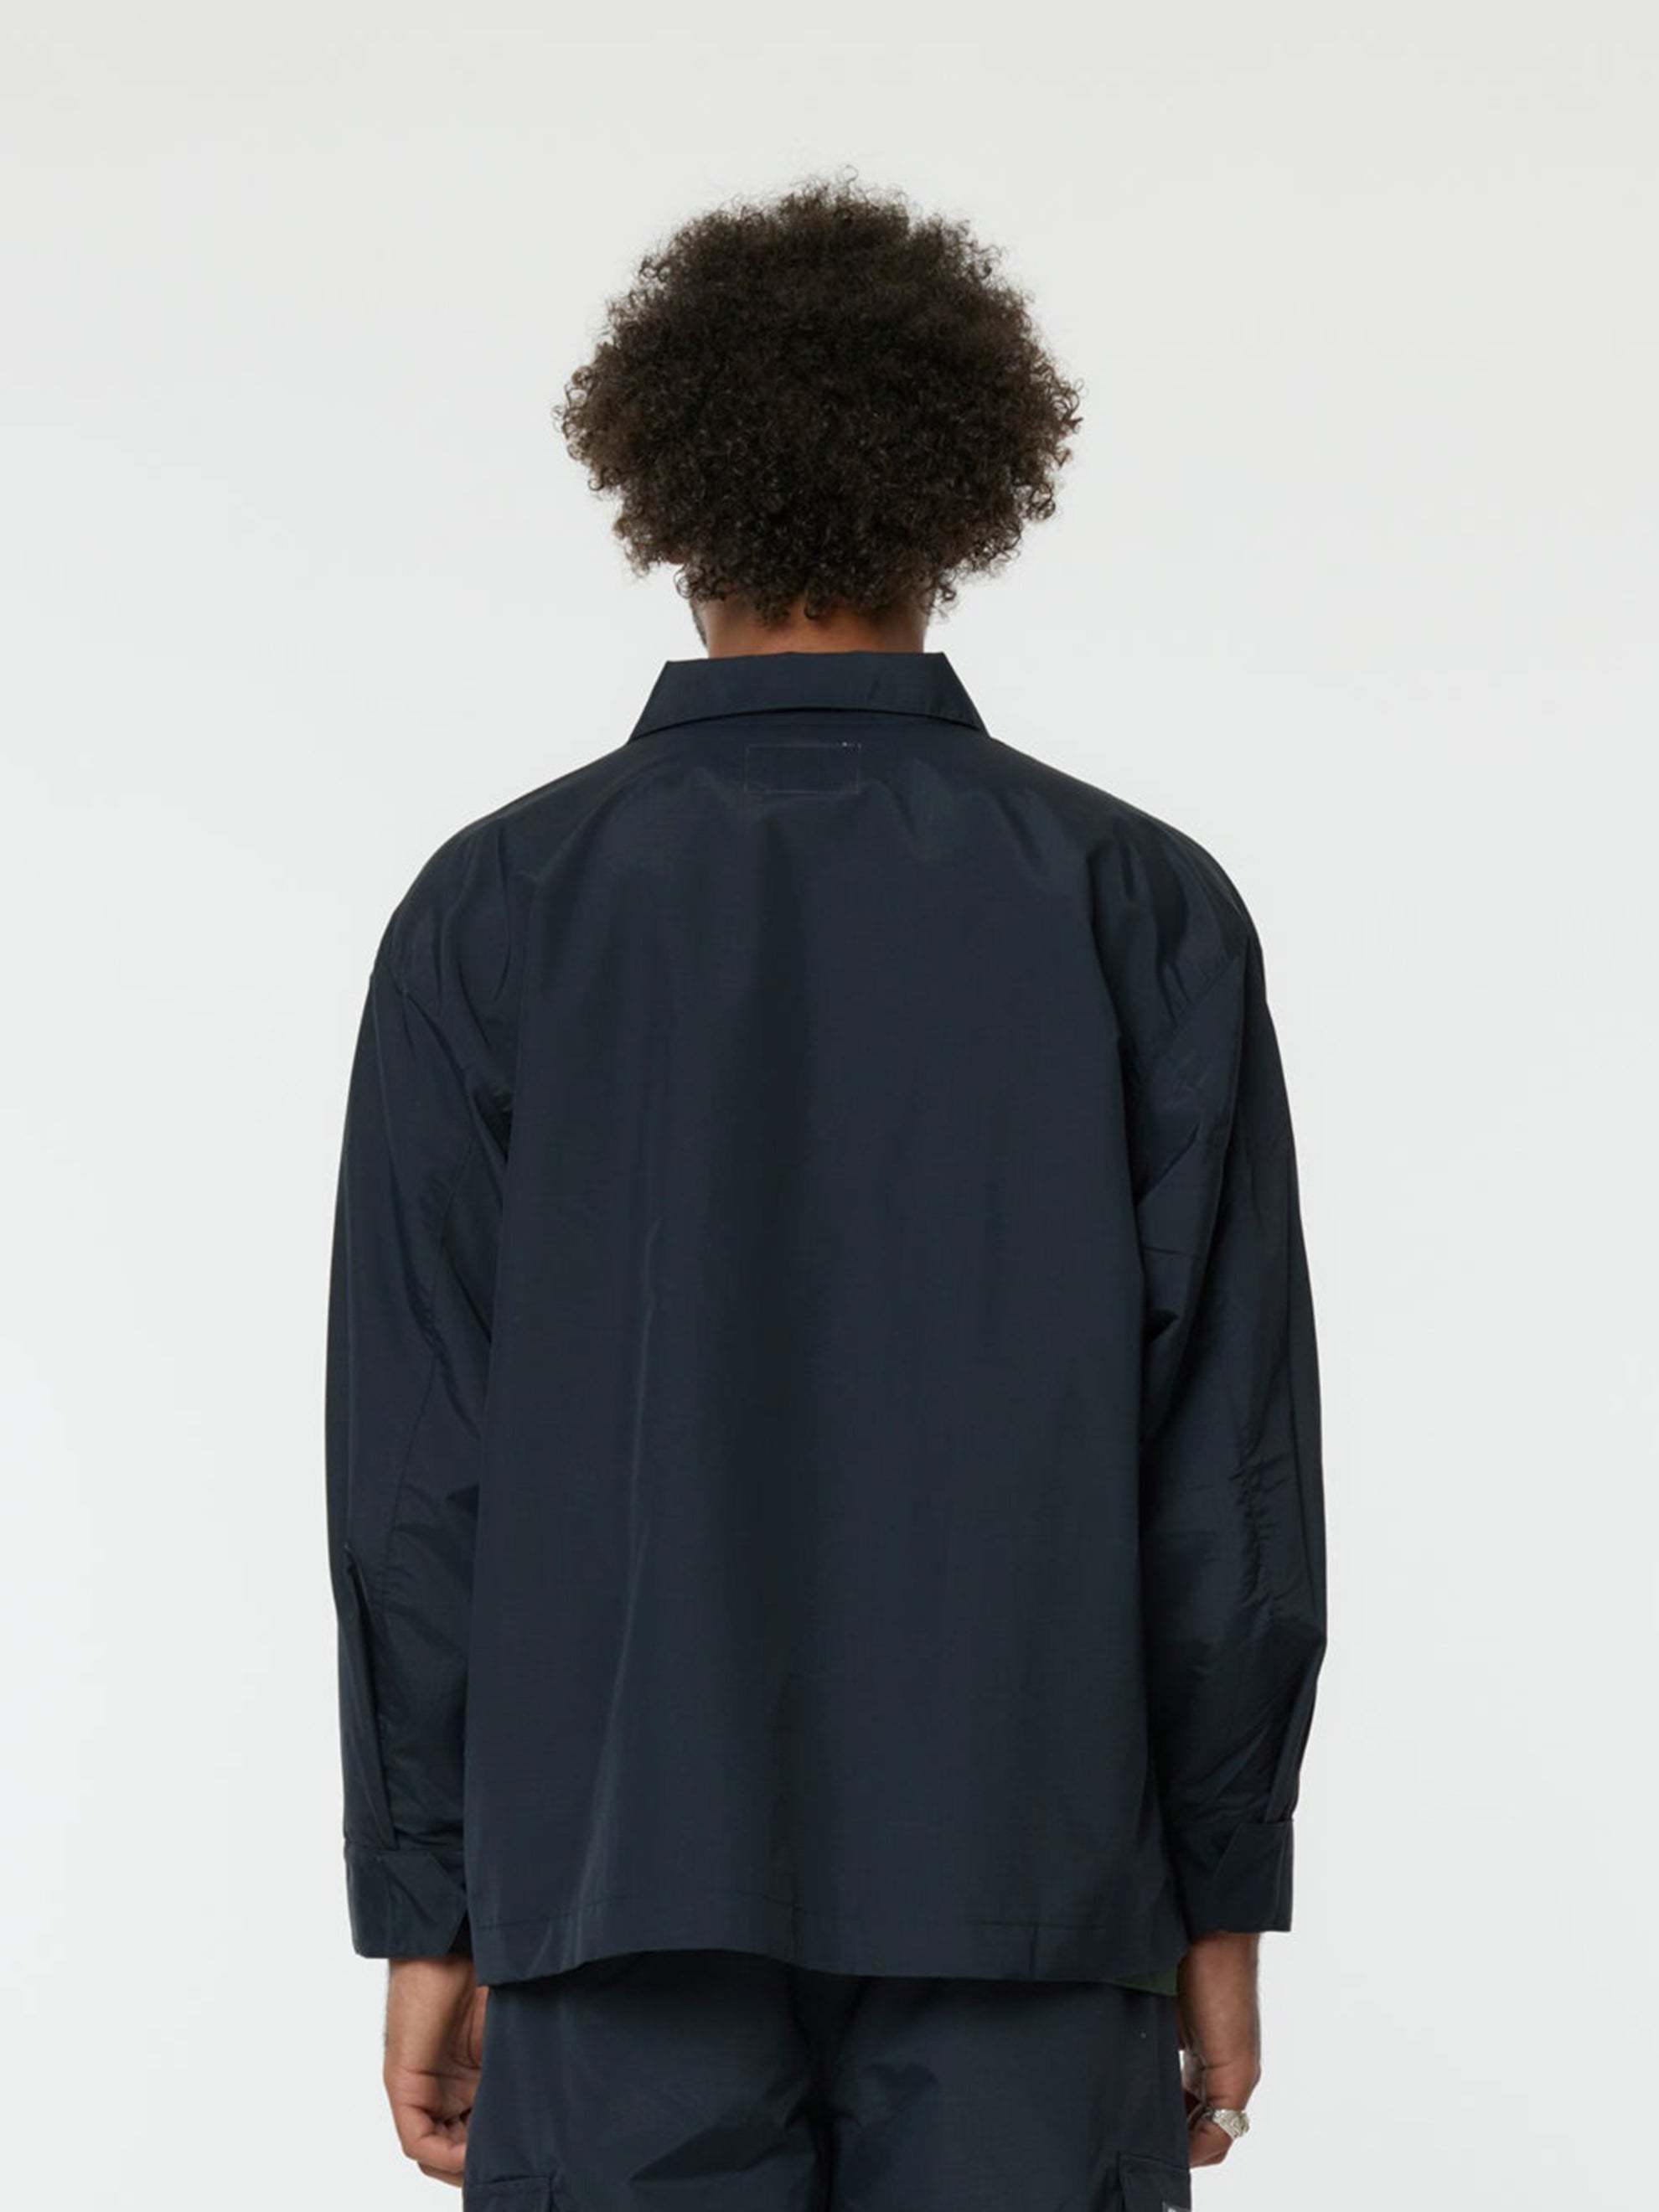 Buy Wtaps CHIEF / JACKET / NYLON. WEATHER. SIGN (NAVY) Online at 